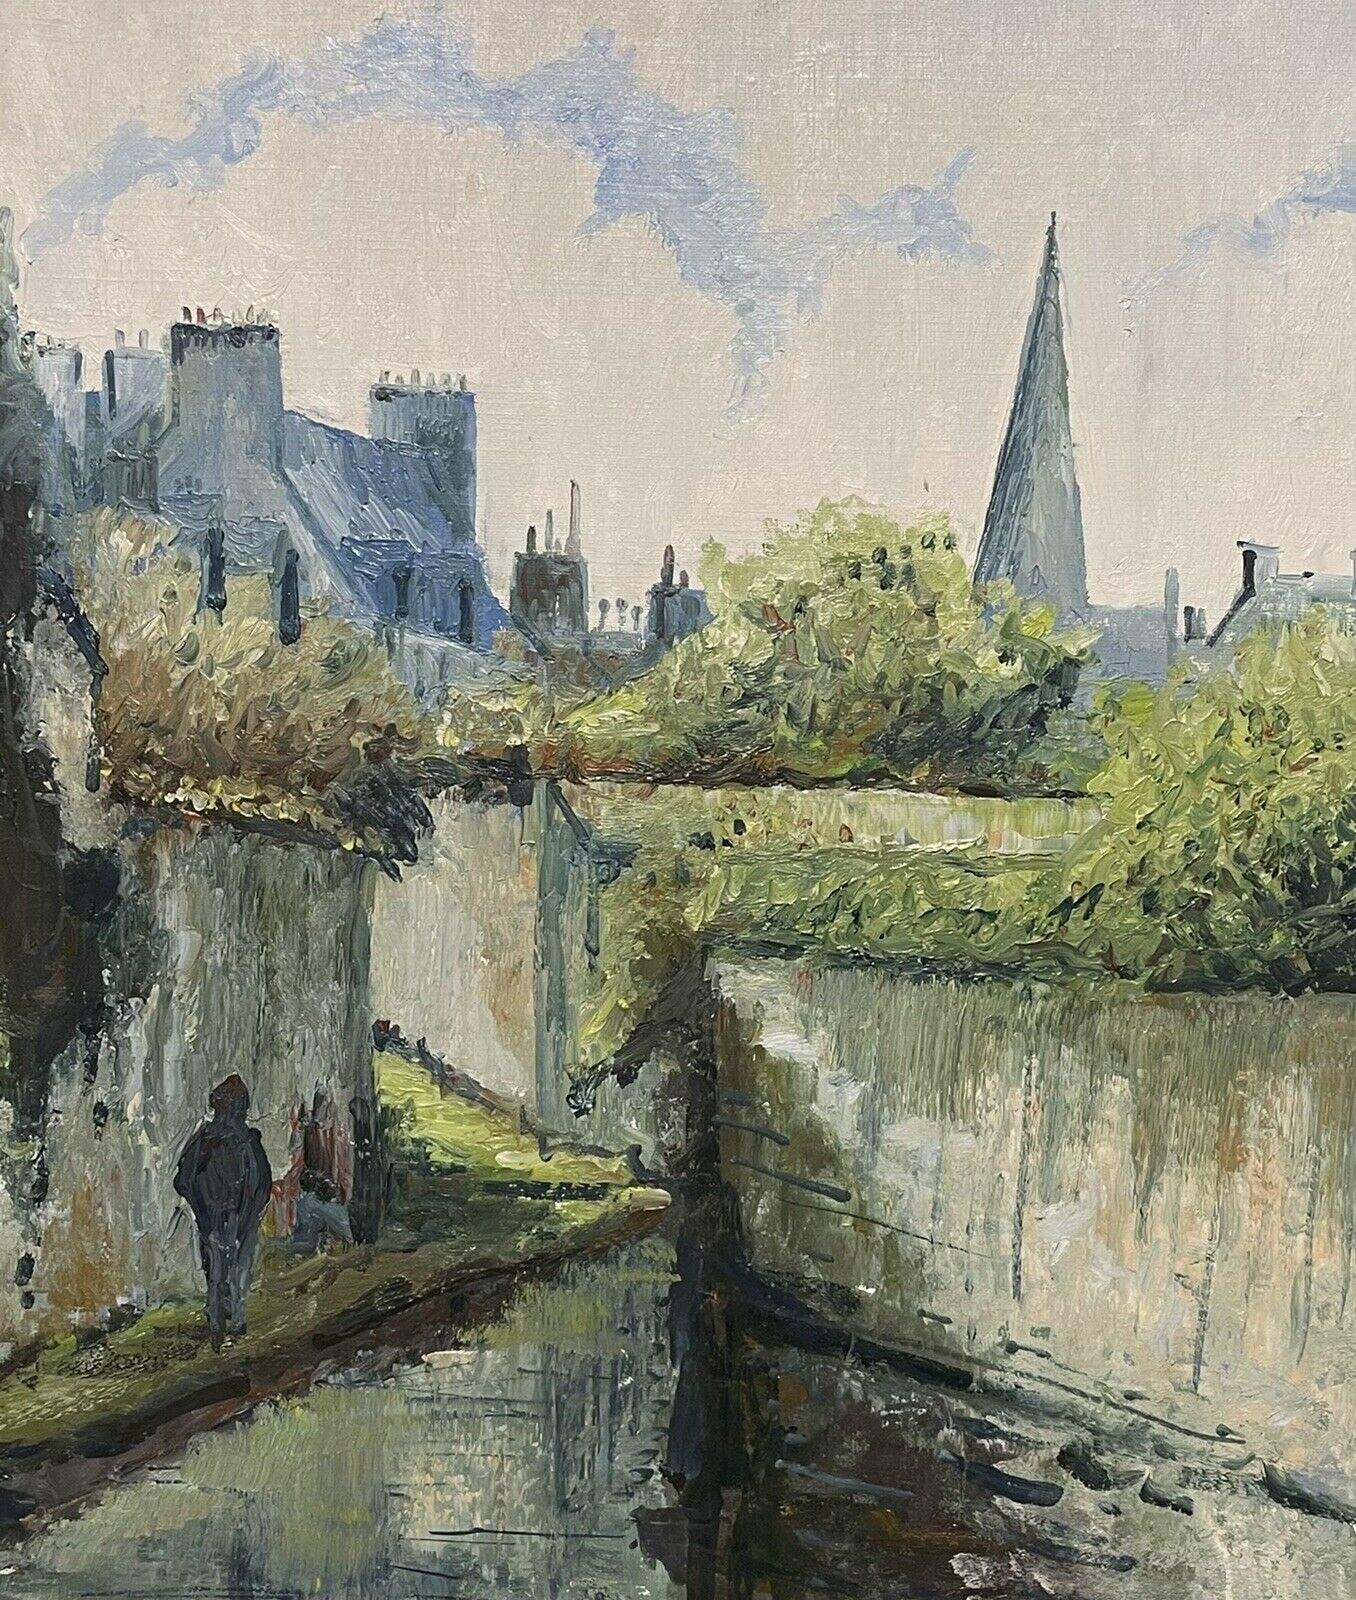 Artist/ School: French School, indistinctly signed, circa 1970's

Title: Walking by the River

Medium: signed oil painting on canvas, framed.

framed:      23 x 29 inches
canvas:  19.75 x 25.75 inches

Provenance: private collection,